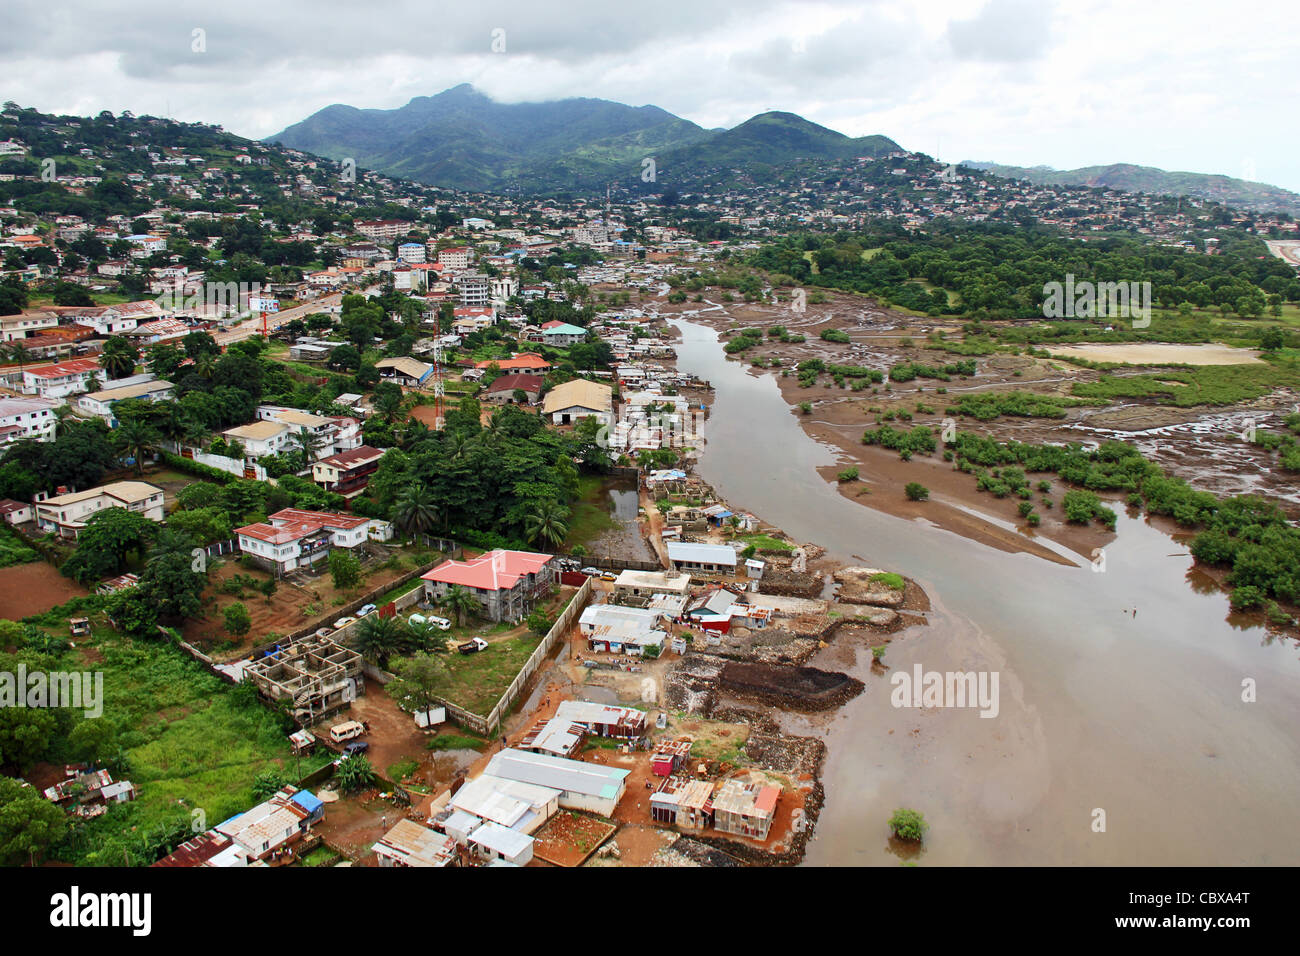 Aerieal view of an area of Freetown, Sierra Leone Stock Photo